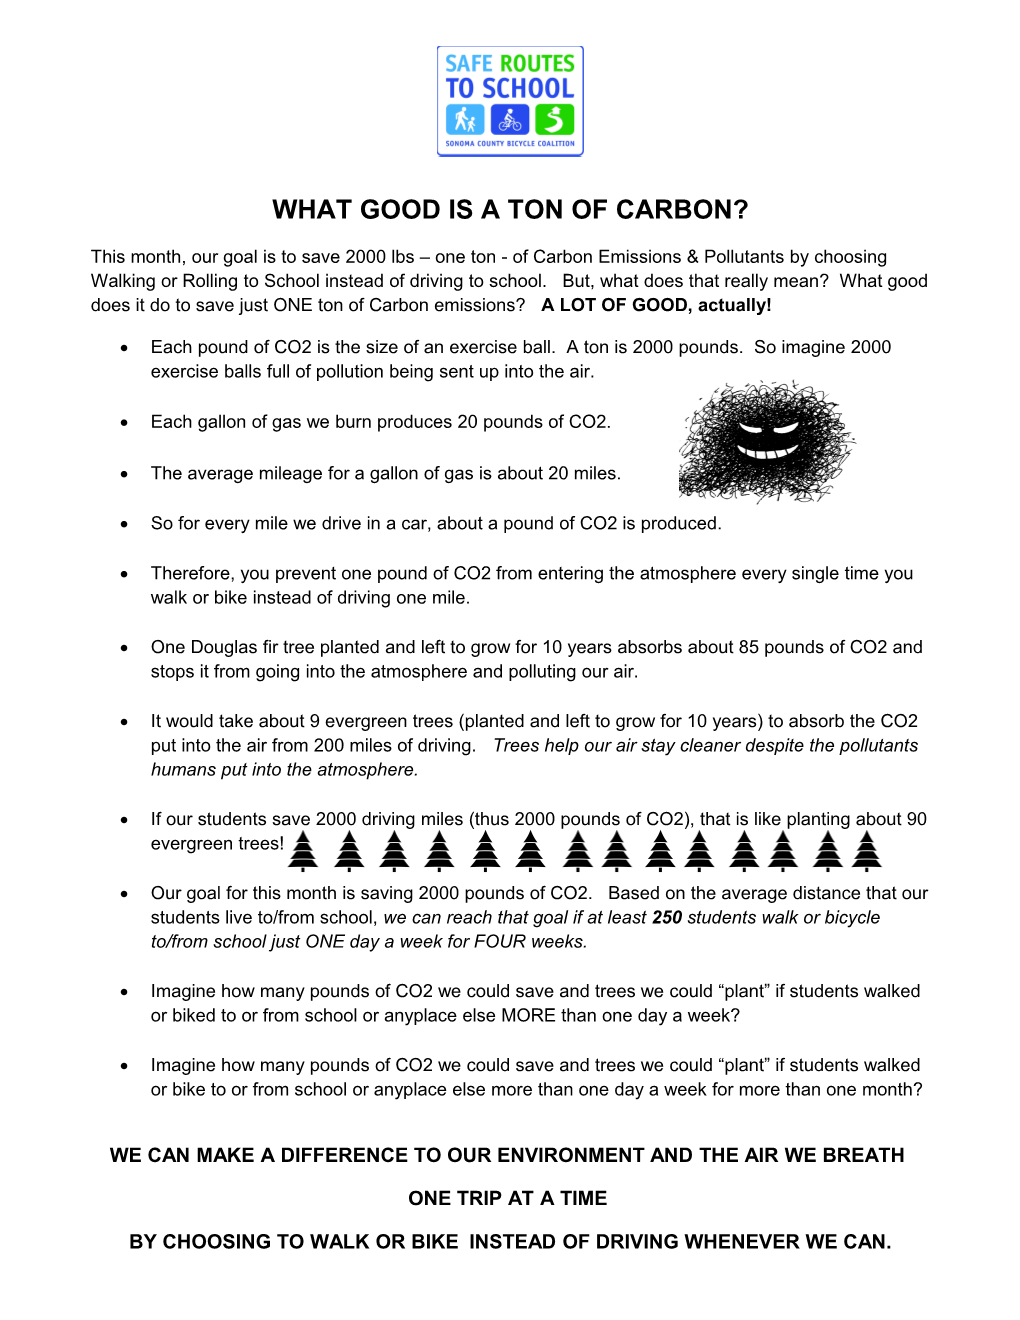 What Good Is a Ton of Carbon?